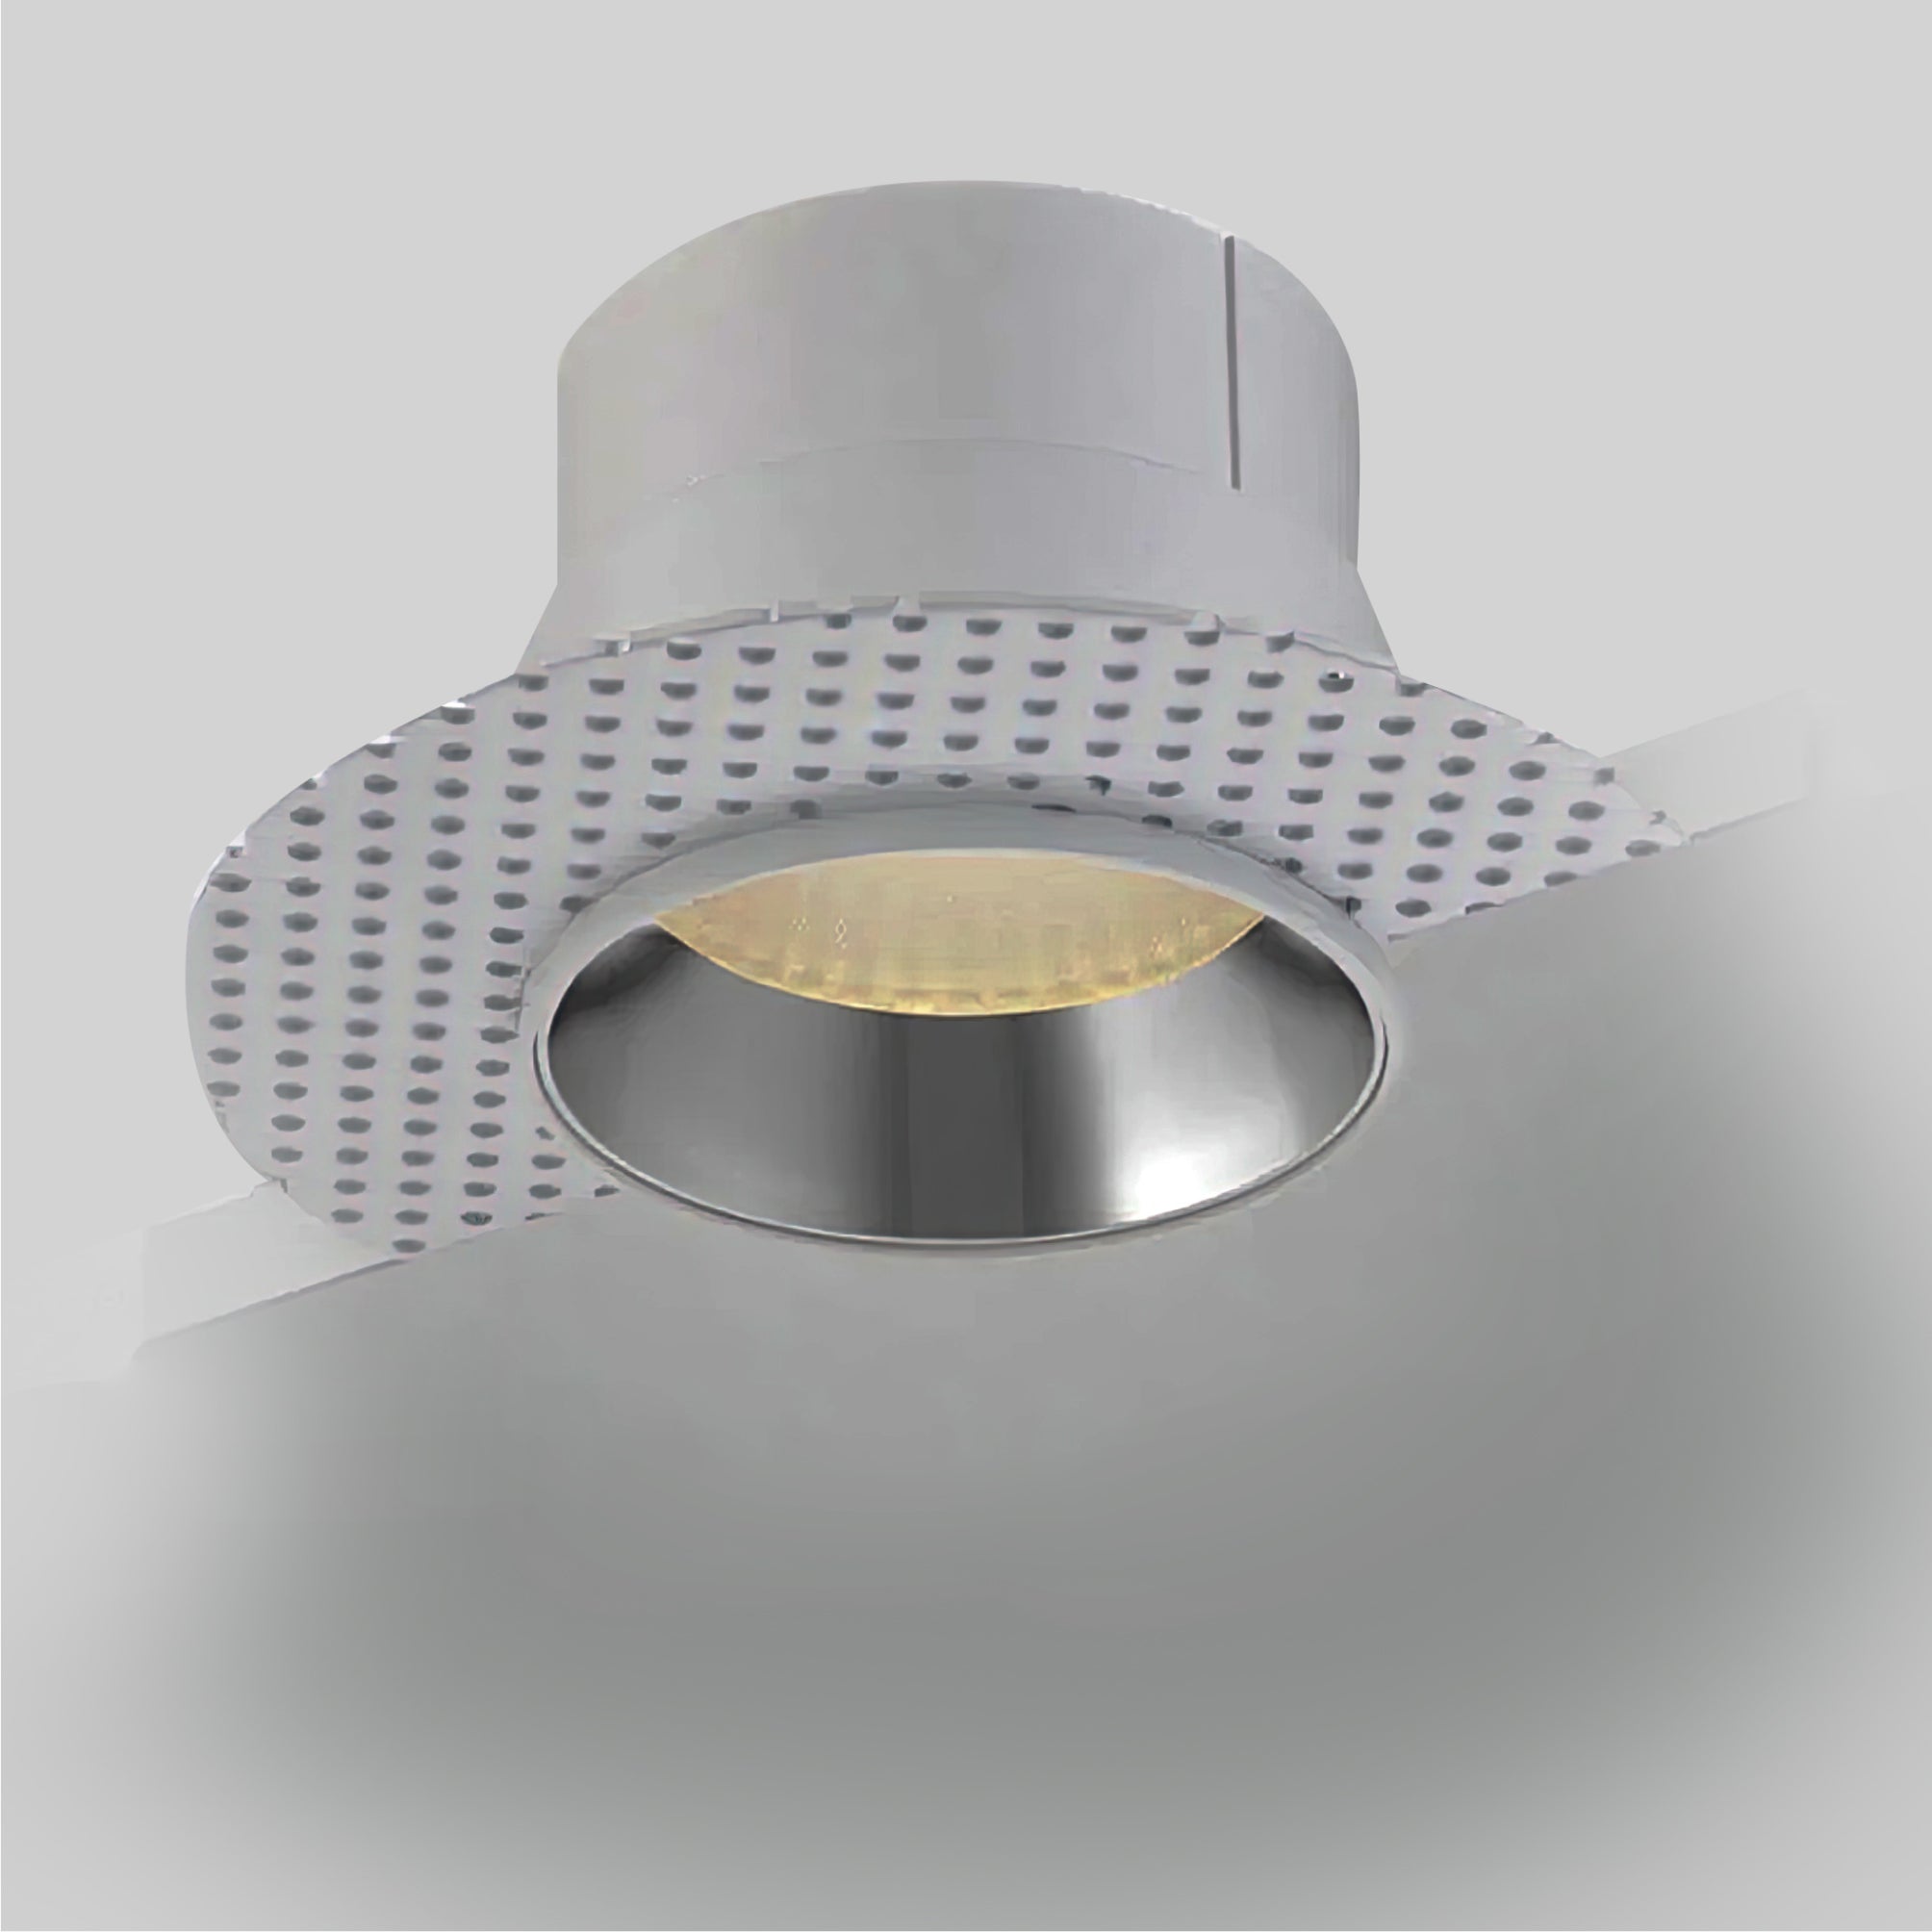 Illusion 4-Inch LED Flanged Recessed Light